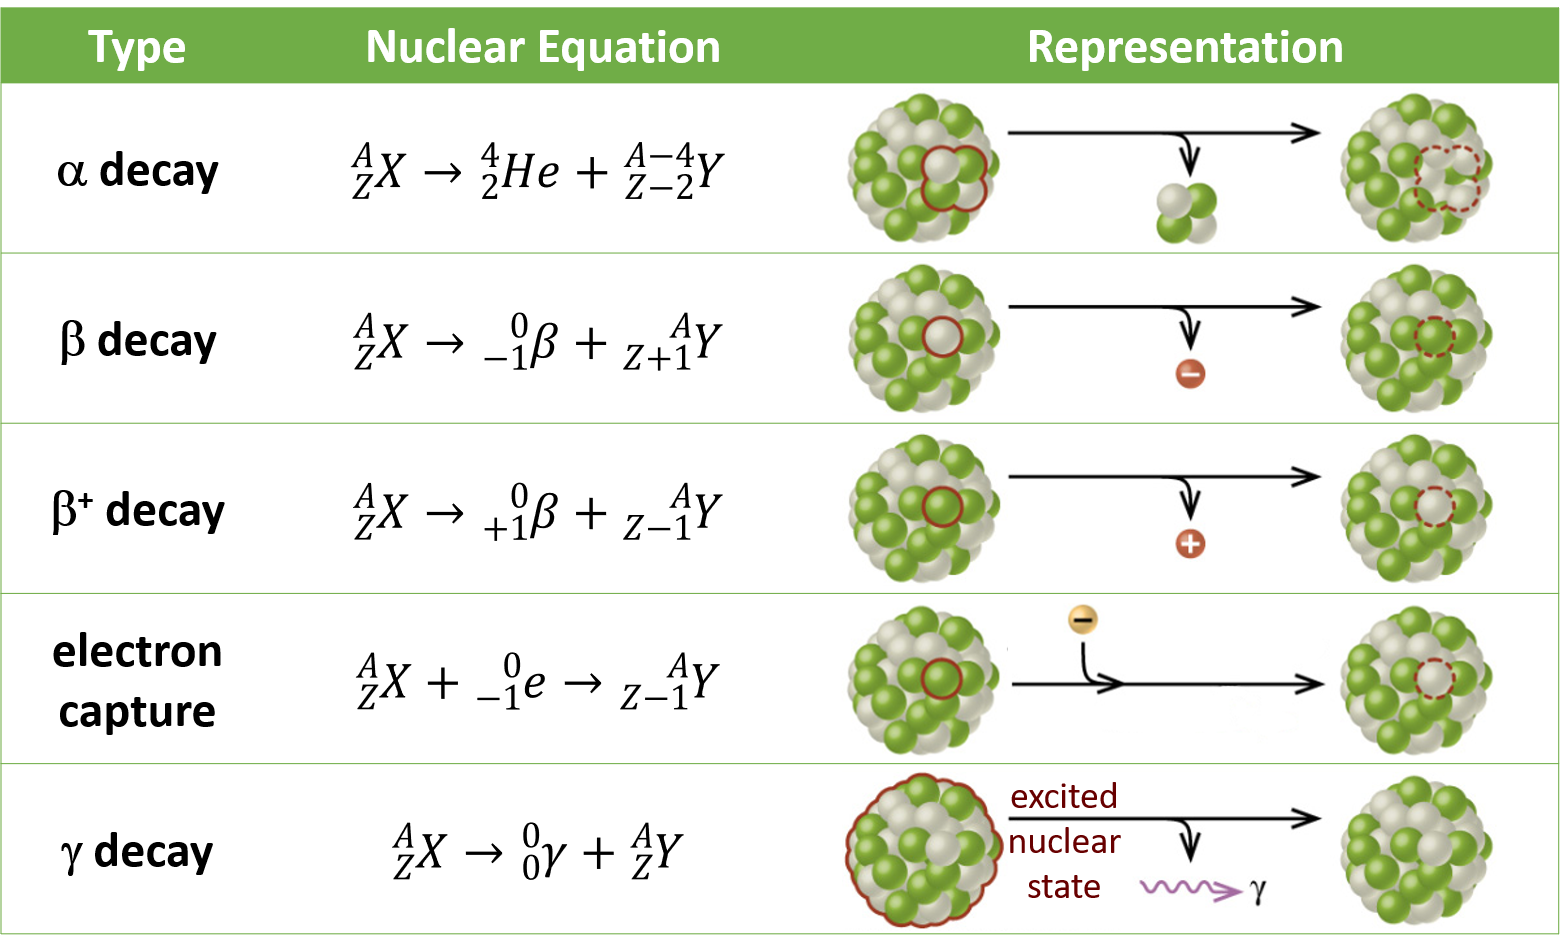 This table has four columns and six rows. The first row is a header row and it labels each column: “Type,” “Nuclear equation,” and “Representation.” Under the “Type” column are the following: “Alpha decay,” “Beta decay,” “Positron emission,” “Electron capture,” and “Gamma decay.” Under the “Nuclear equation” column are several equations. Each begins with superscript A stacked over subscript Z X. There is arrow and then the following equations: “superscript 4 stacked over subscript 2 He plus superscript A minus 4 stacked over subscript Z minus 2 Y,” “superscript 0 stacked over subscript negative 1 e plus superscript A stacked over subscript Z plus 1 Y,” “superscript 0 stacked over subscript 0 lowercase gamma plus superscript A stacked over subscript Z Y,” “superscript 0 stacked over subscript positive 1 e plus superscript A stacked over subscript Y minus 1 Y,” and “superscript 0 stacked over subscript negative 1 e plus superscript A stacked over subscript Y minus 1 Y.” Under the “Representation” column are the five diagrams. The first shows a cluster of green and white spheres. A section of the cluster containing two white and two green spheres is outlined. There is a right-facing arrow pointing to a similar cluster as previously described, but the outlined section is missing. From the arrow another arrow branches off and points downward. The small cluster to two white spheres and two green spheres appear at the end of the arrow. The next diagram shows the same cluster of white and green spheres. One white sphere is outlined. There is a right-facing arrow to a similar cluster, but the white sphere is missing. Another arrow branches off the main arrow and a red sphere with a negative sign appears at the end. The next diagram shows the same cluster of white and green spheres. One green sphere is outlined. There is a right-facing arrow to a similar cluster, but the green sphere is missing. Another arrow branches off the main arrow and a red sphere with a positive sign appears at the end. The next diagram shows the same cluster of white and green spheres. One green sphere is outlined. There is a right-facing arrow to a similar cluster, but the green sphere is missing. An arrow branch off the main arrow and shows a gold sphere with a negative sign joining with the right-facing arrow. The next diagram shows the same cluster of white and green spheres. The whole sphere is outlined and labeled, “excited nuclear state.” There is a right-facing arrow that points to the same cluster. No spheres are missing. Off the main arrow is another arrow which points to a purple squiggle arrow which in turn points to a lowercase gamma.